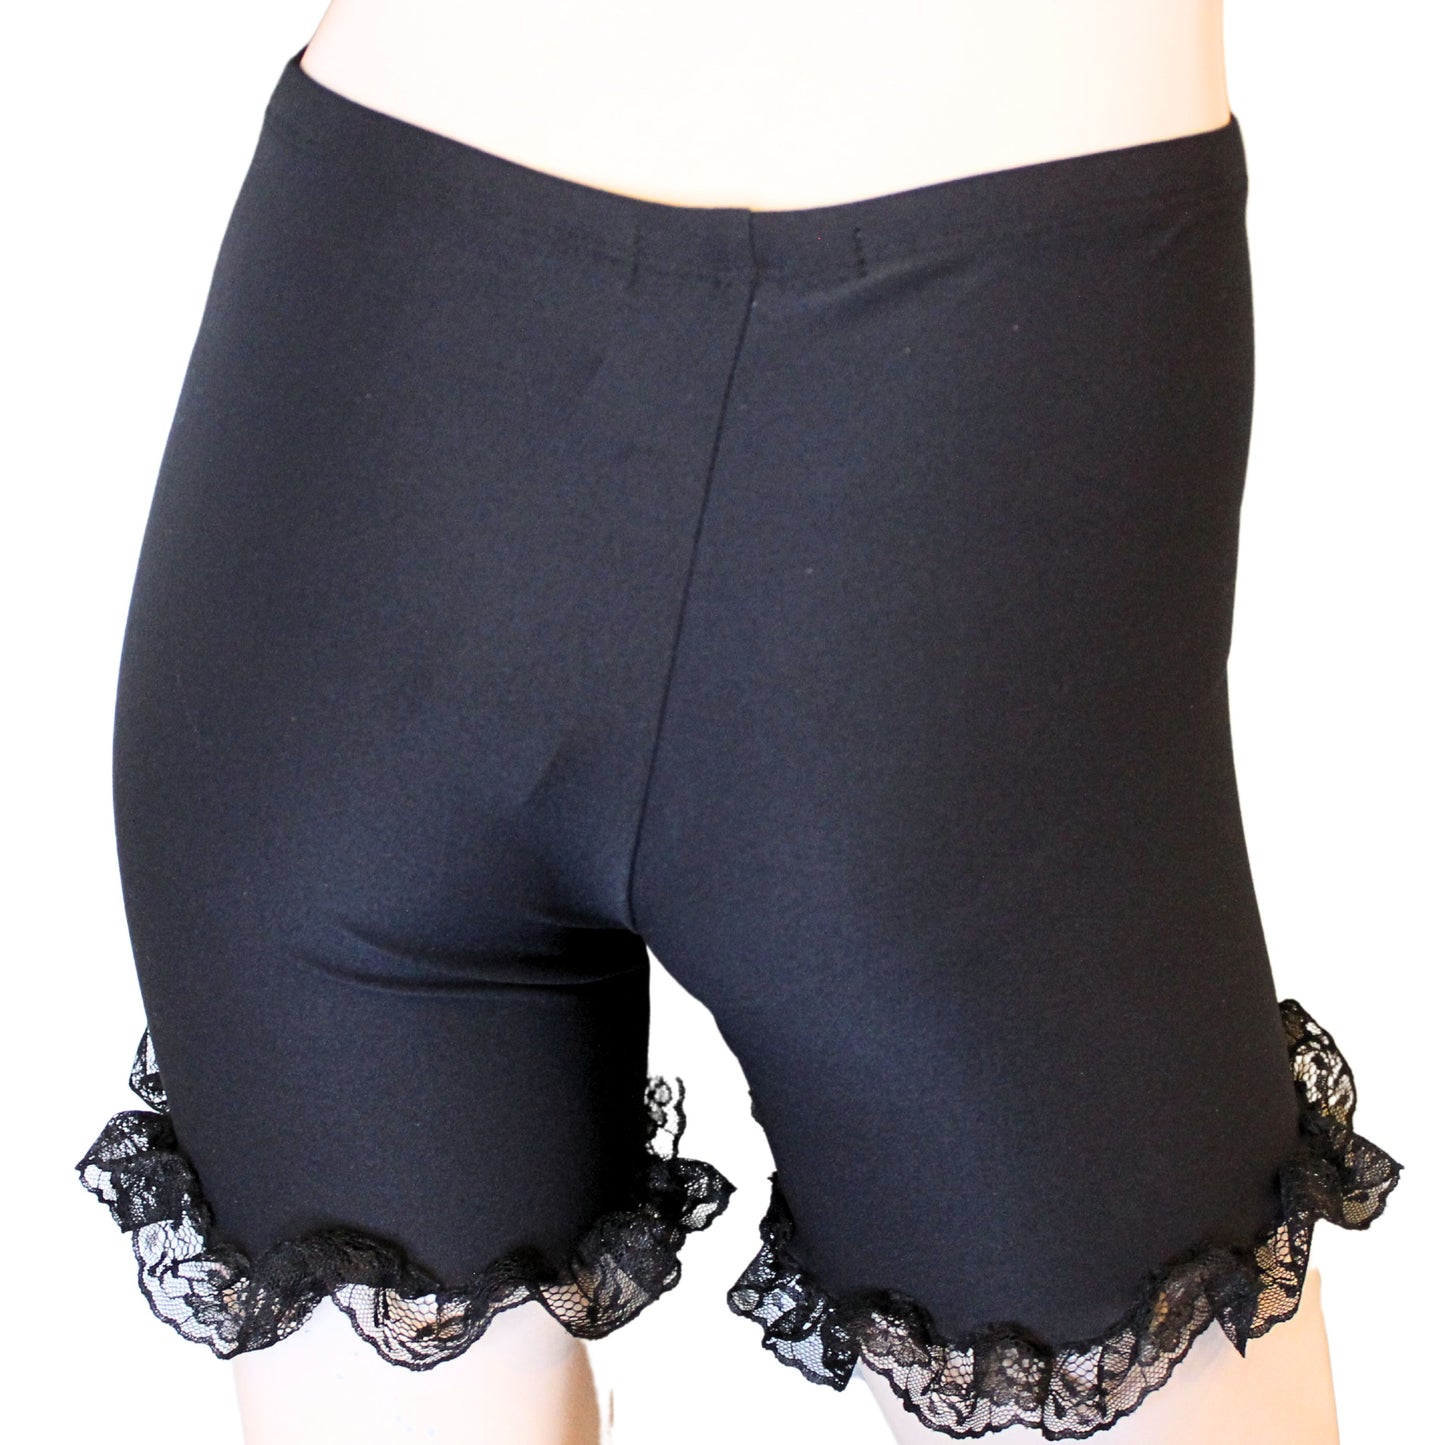 The VM Tap Shorts with Lace